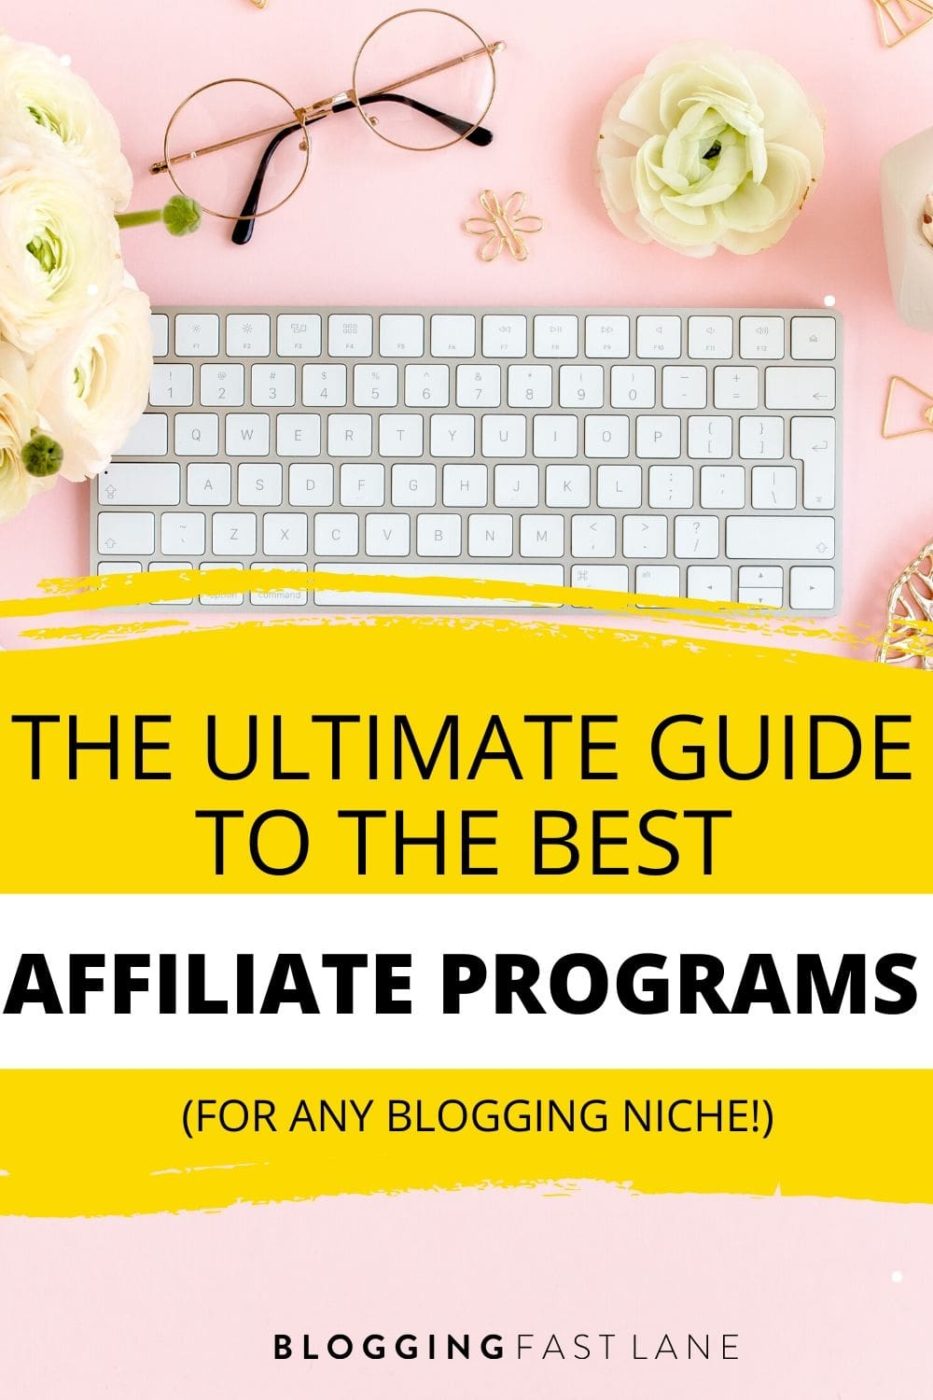 Best Affiliate Programs for Bloggers | Affiliate programs are the best way for bloggers to make money... Check out our complete guide to find the best programs to join, no matter what niche you're in!